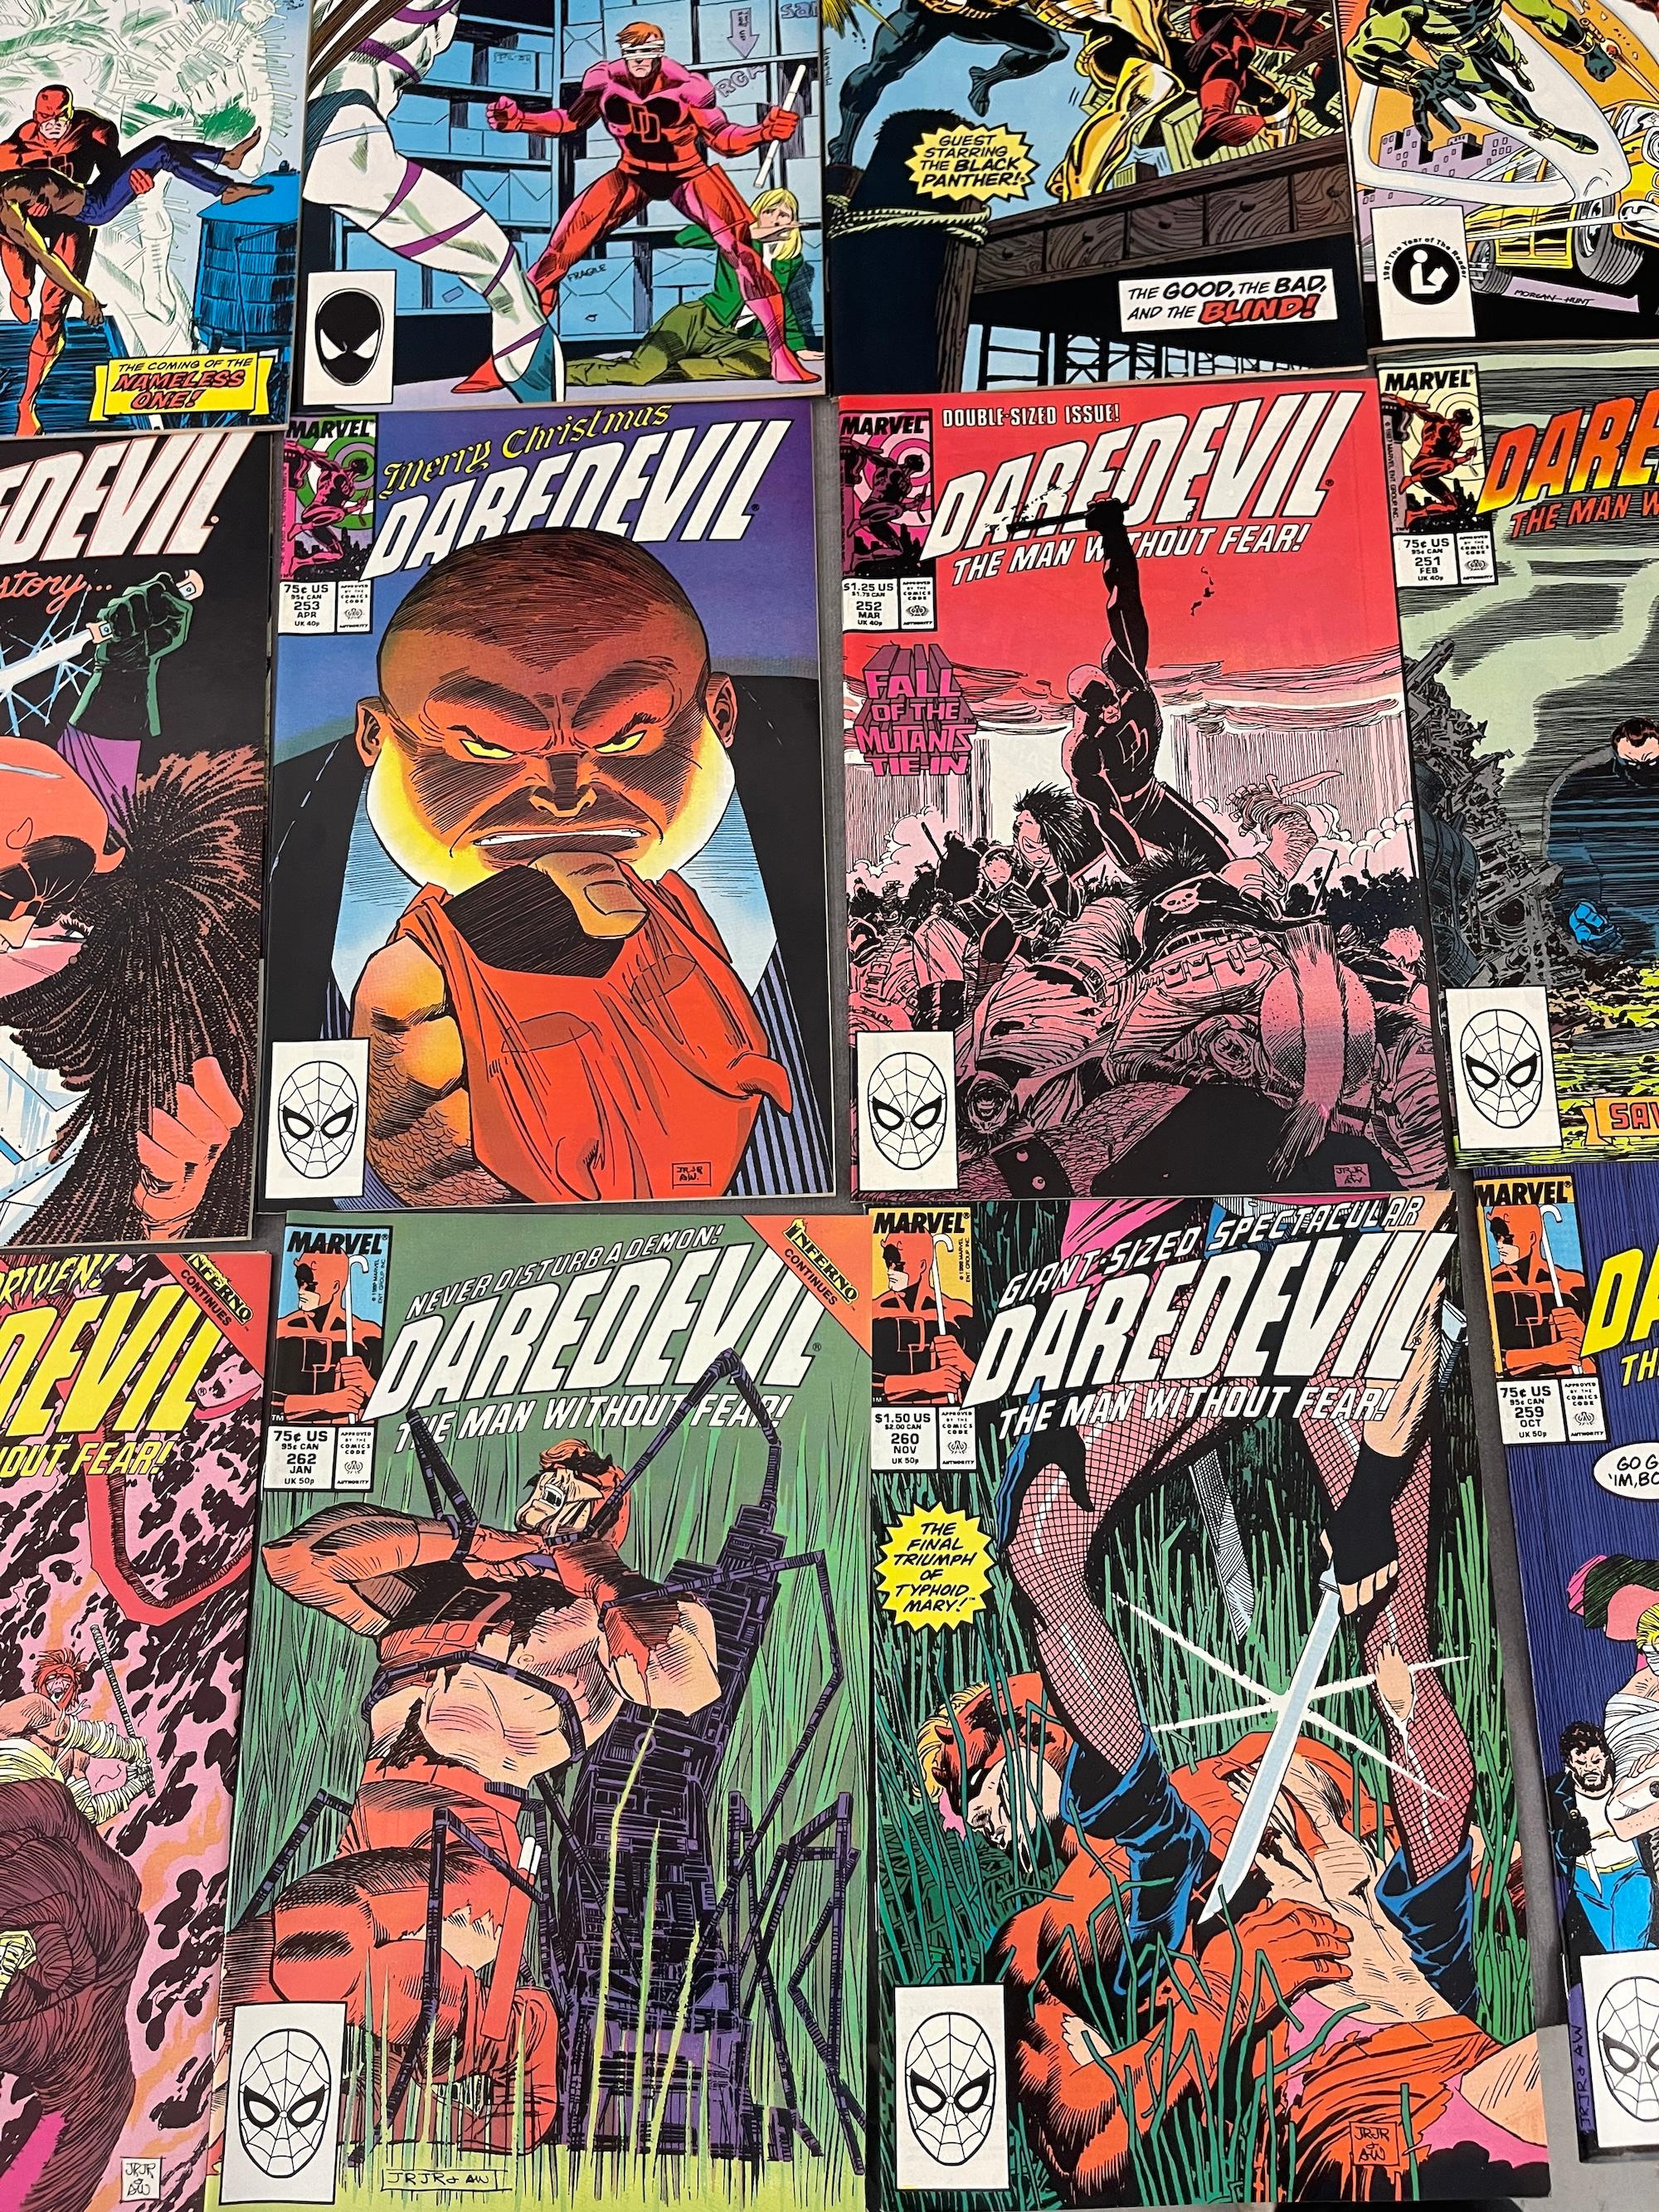 Daredevil Marvel Comic Book Collection Lot of 25